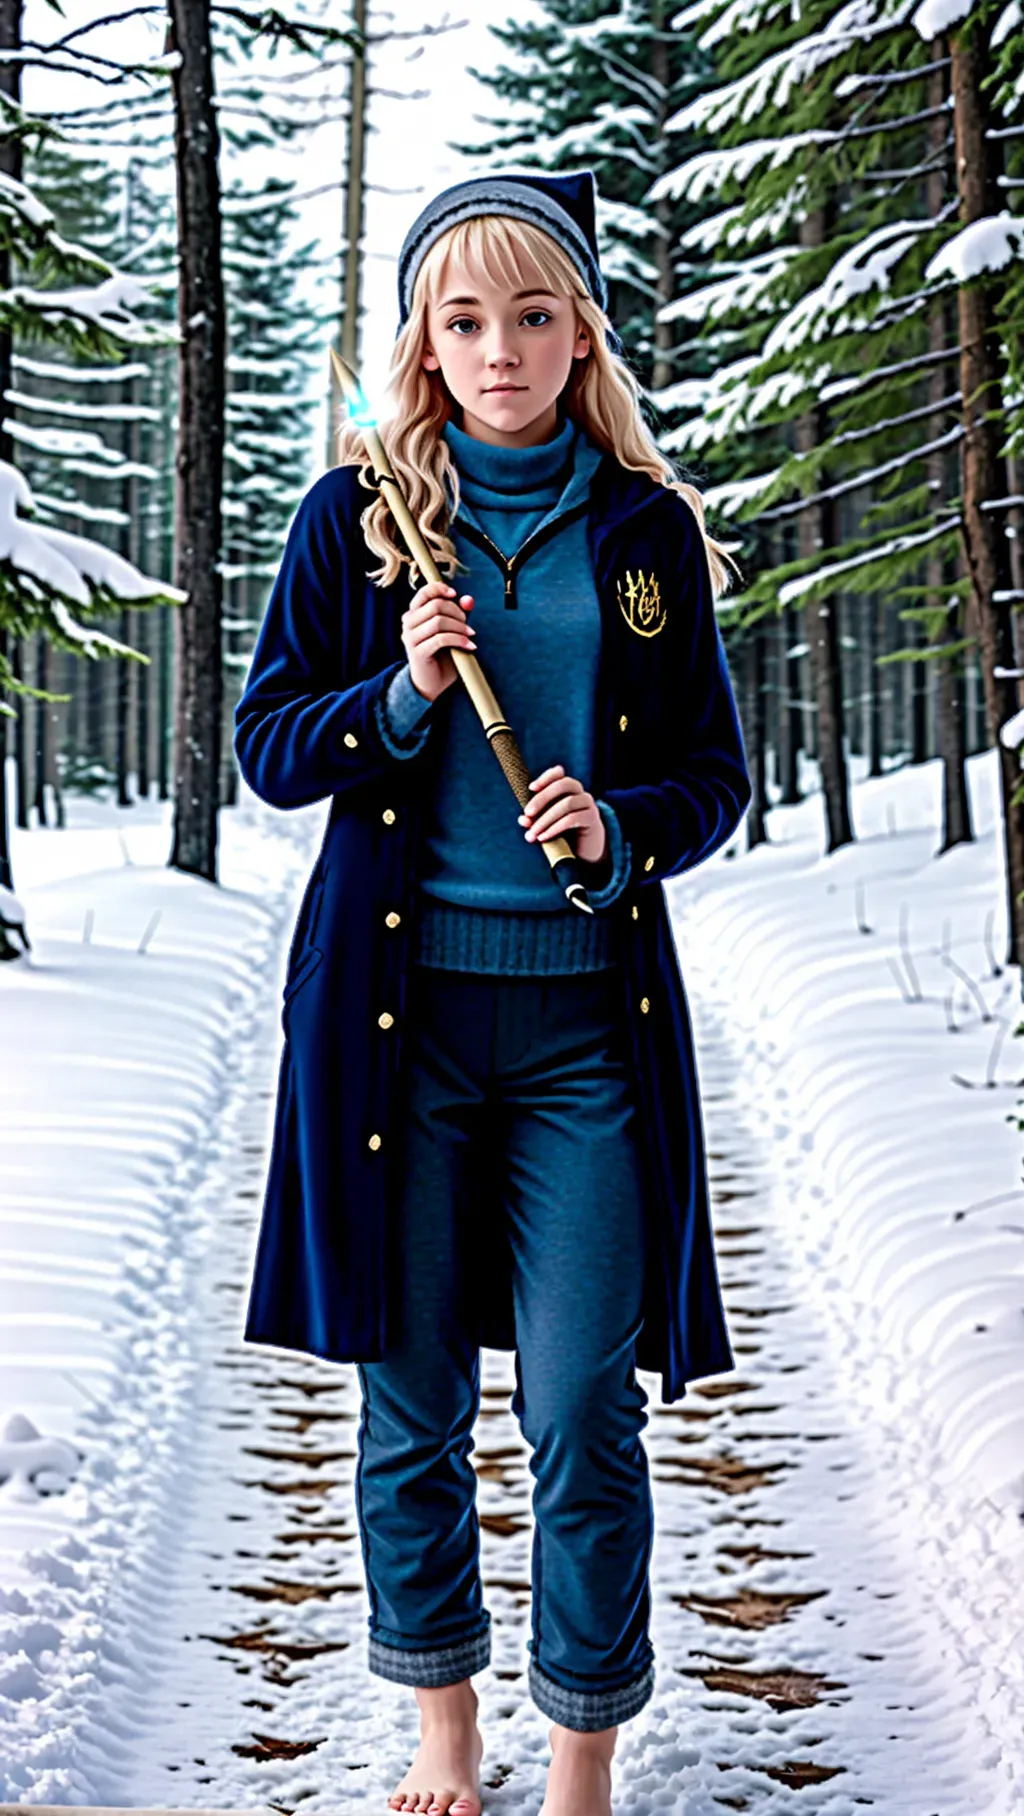 barefoot adult Luna wearing wearing casual clothing with capris pants while holding her magic wand and wandering the snowy Dark Forest outside of Hogwarts during winter, barefoot, barefoot, movie, Evanna Lynch, Harry Potter, Hogwarts School for witchcraft and wizardry, blond hair,